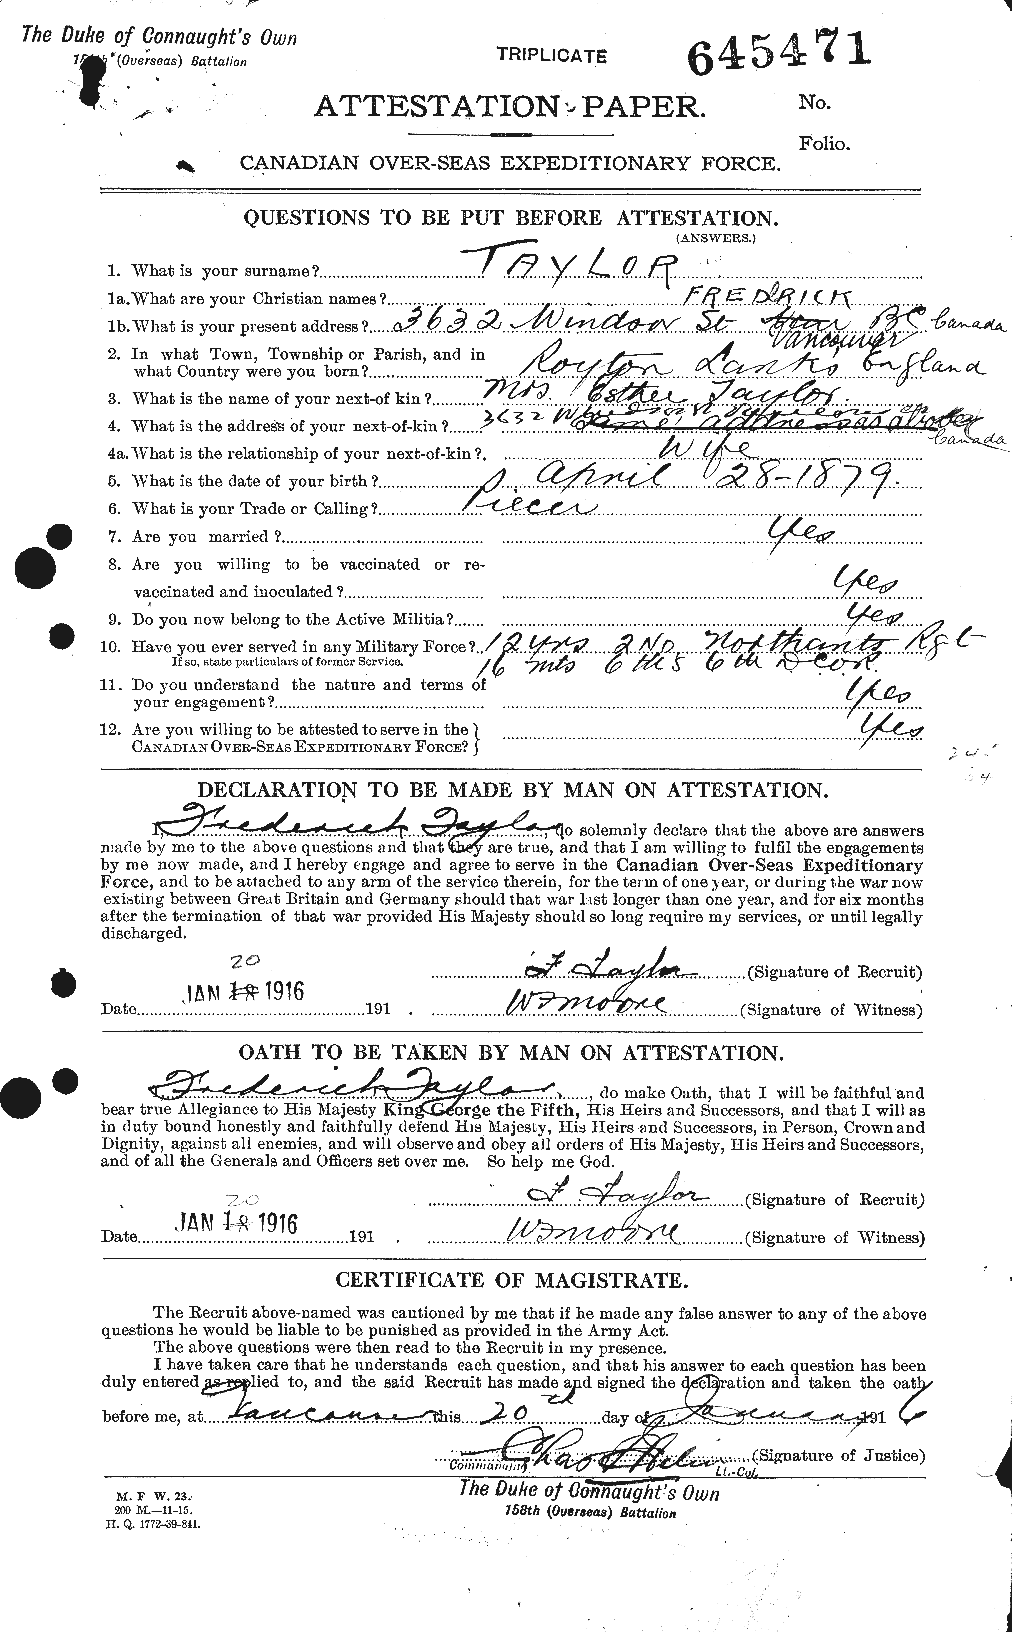 Personnel Records of the First World War - CEF 625779a